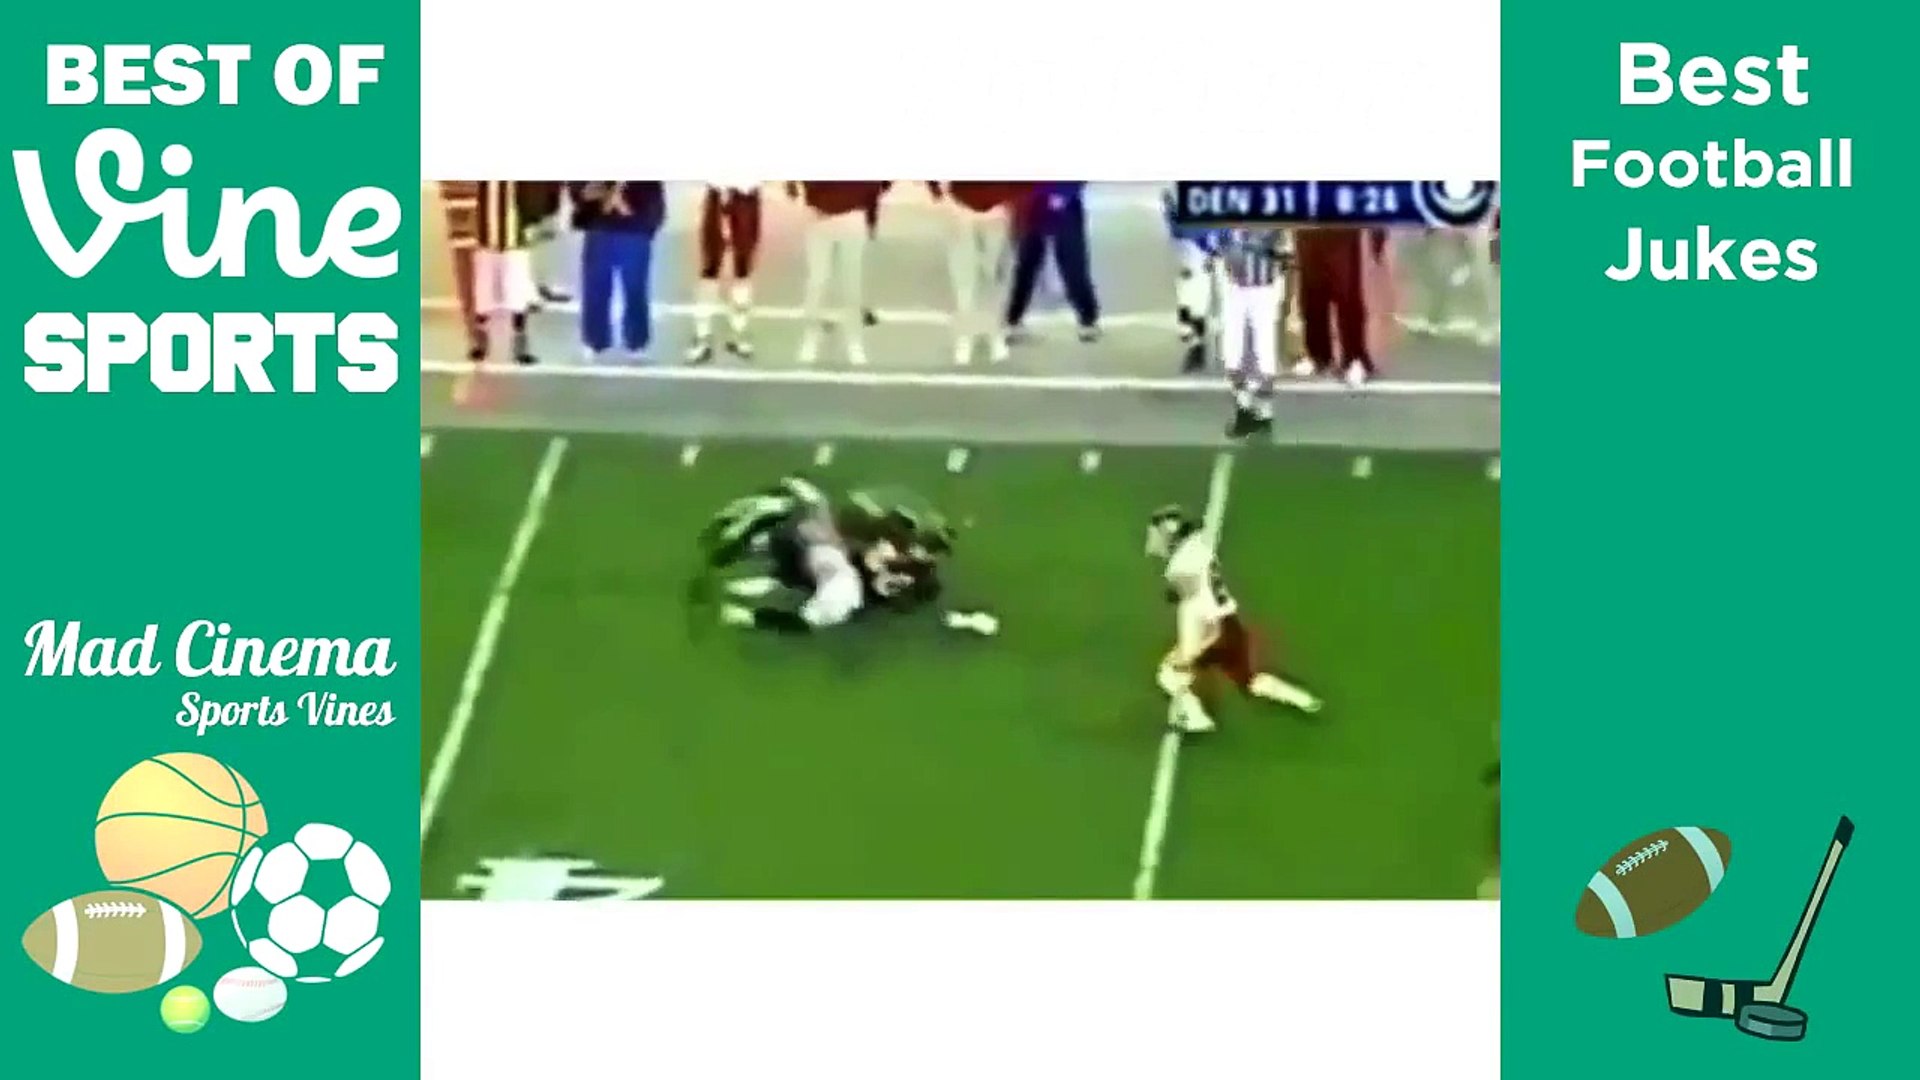 Best Football Jukes Of All Time